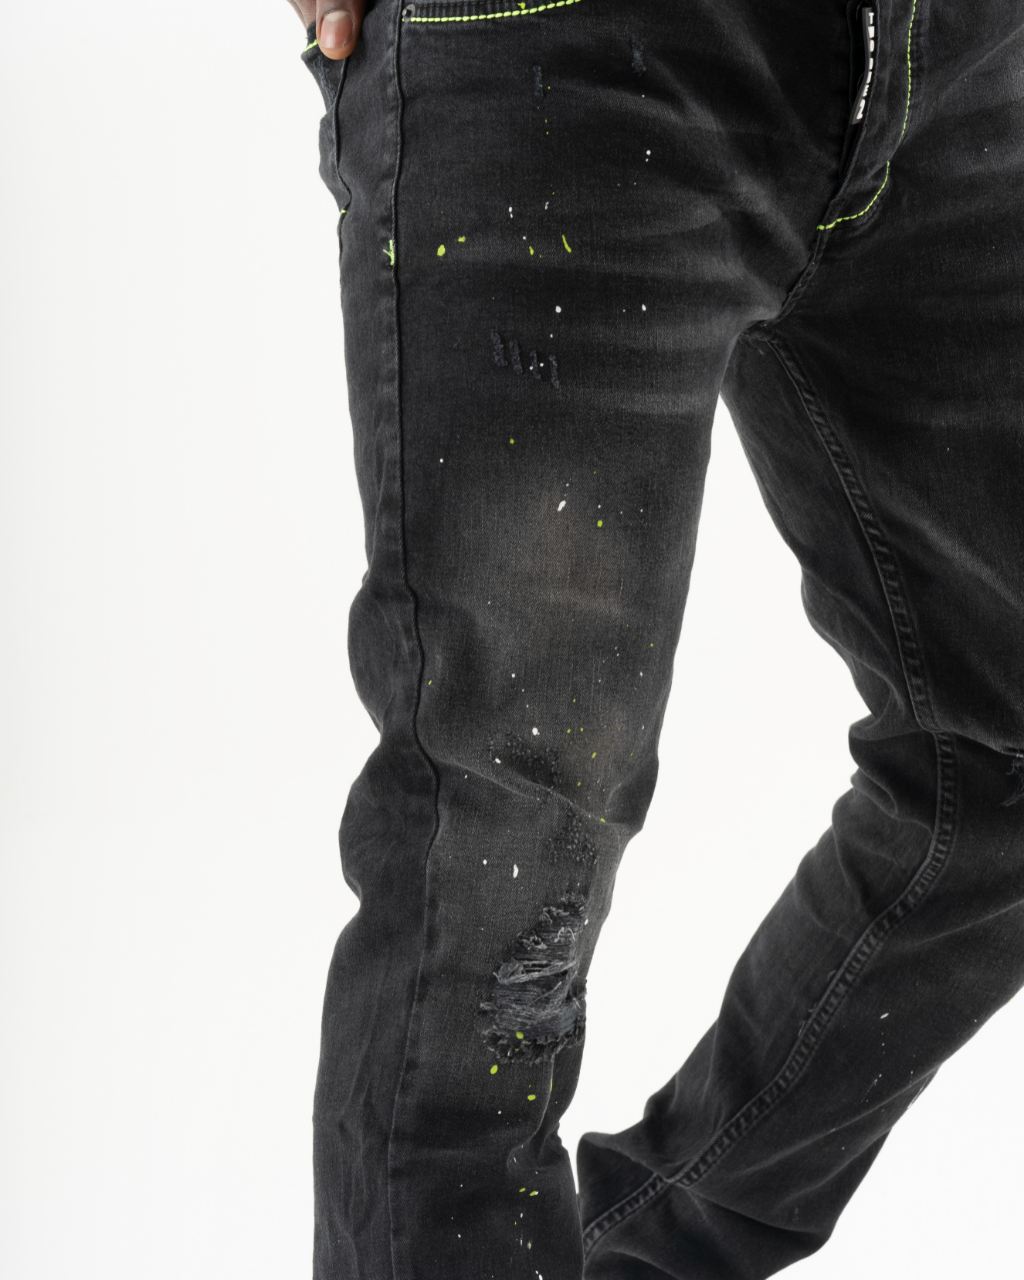 A man wearing a pair of black skinny TWILIGHT jeans with neon splatters.